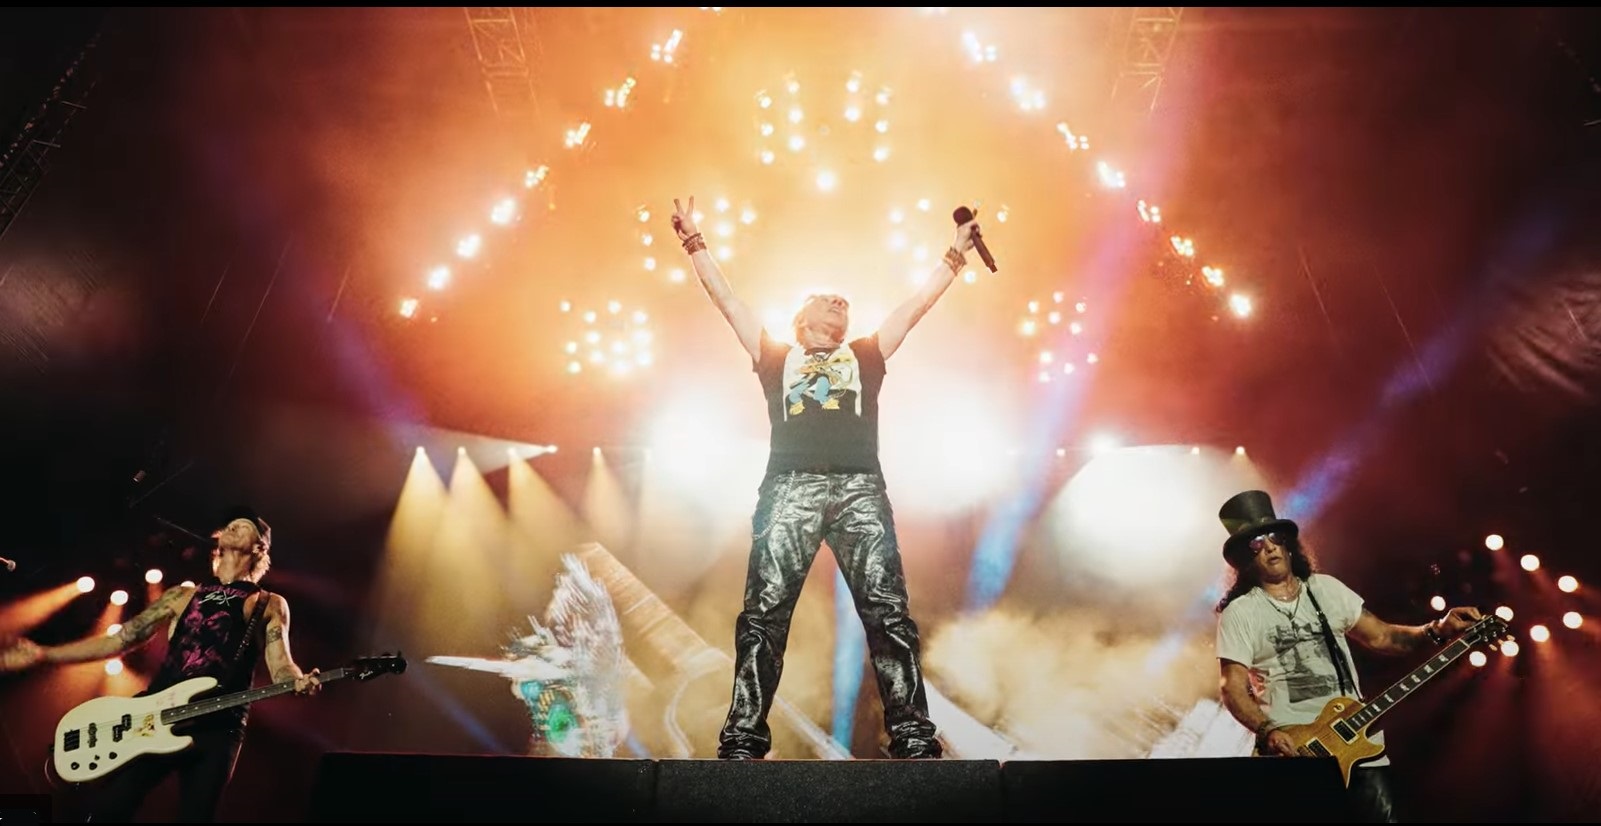 Watch The Guns N' Roses Video For Brand New Song "Perhaps"